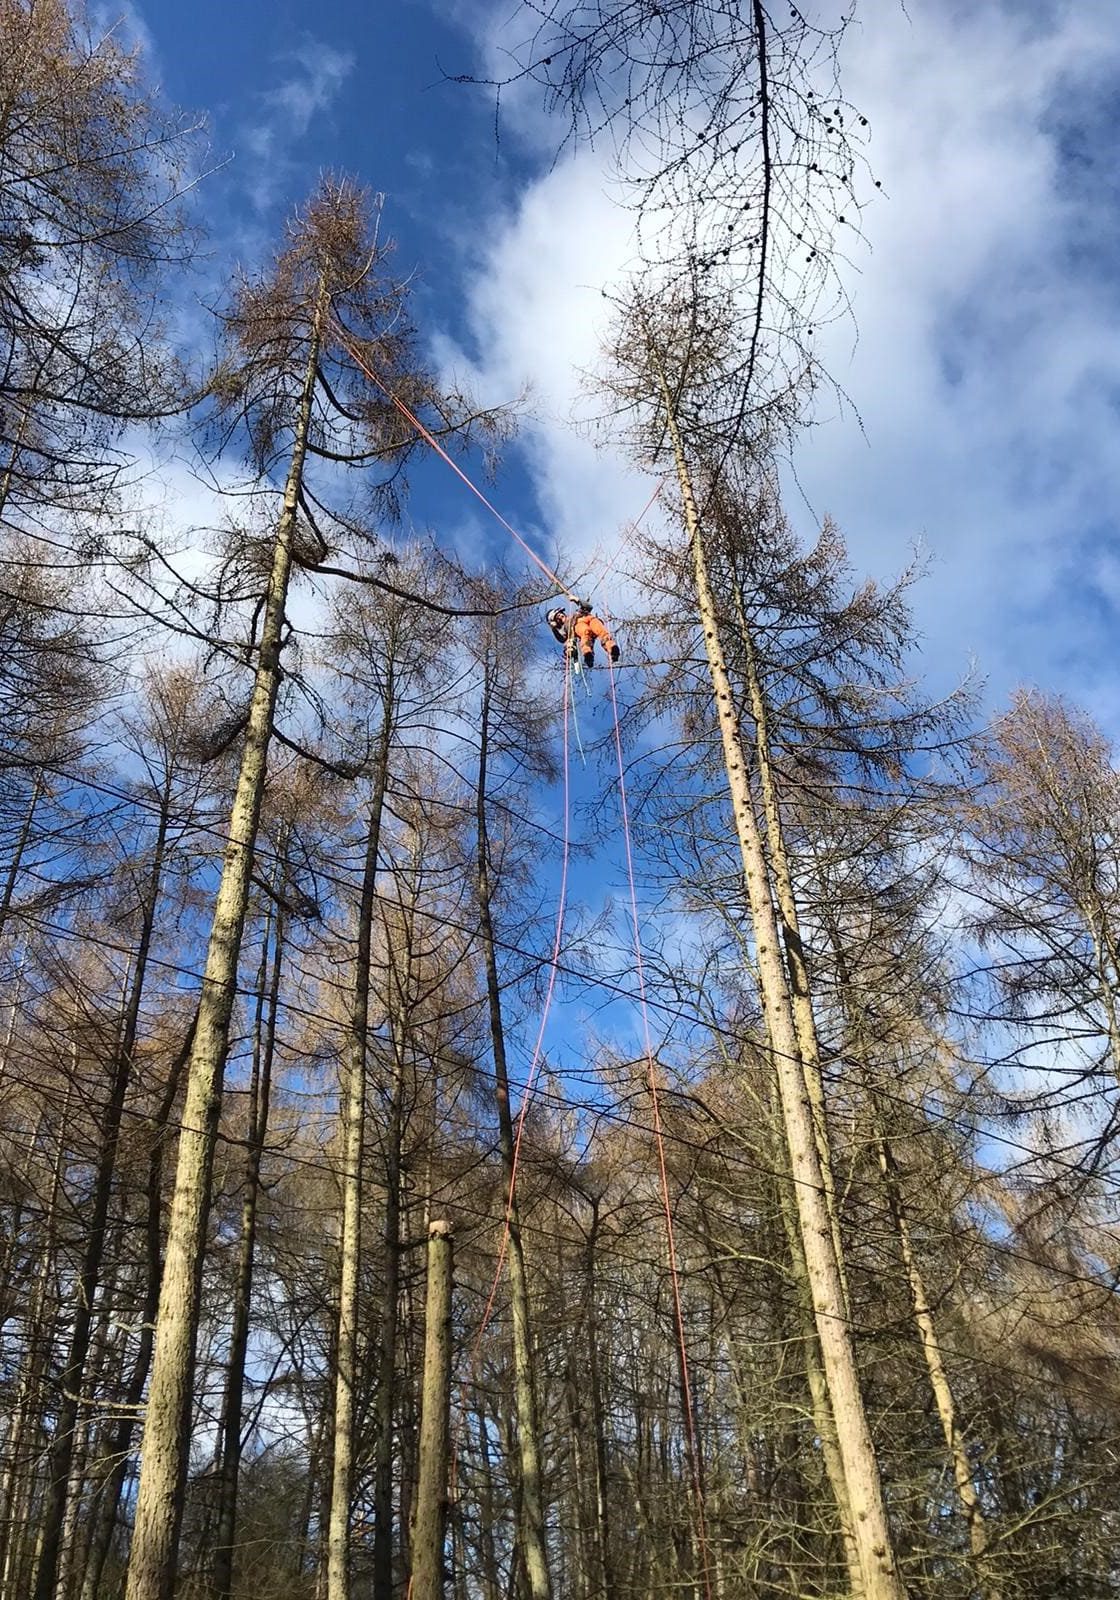 Tree top work on ropes